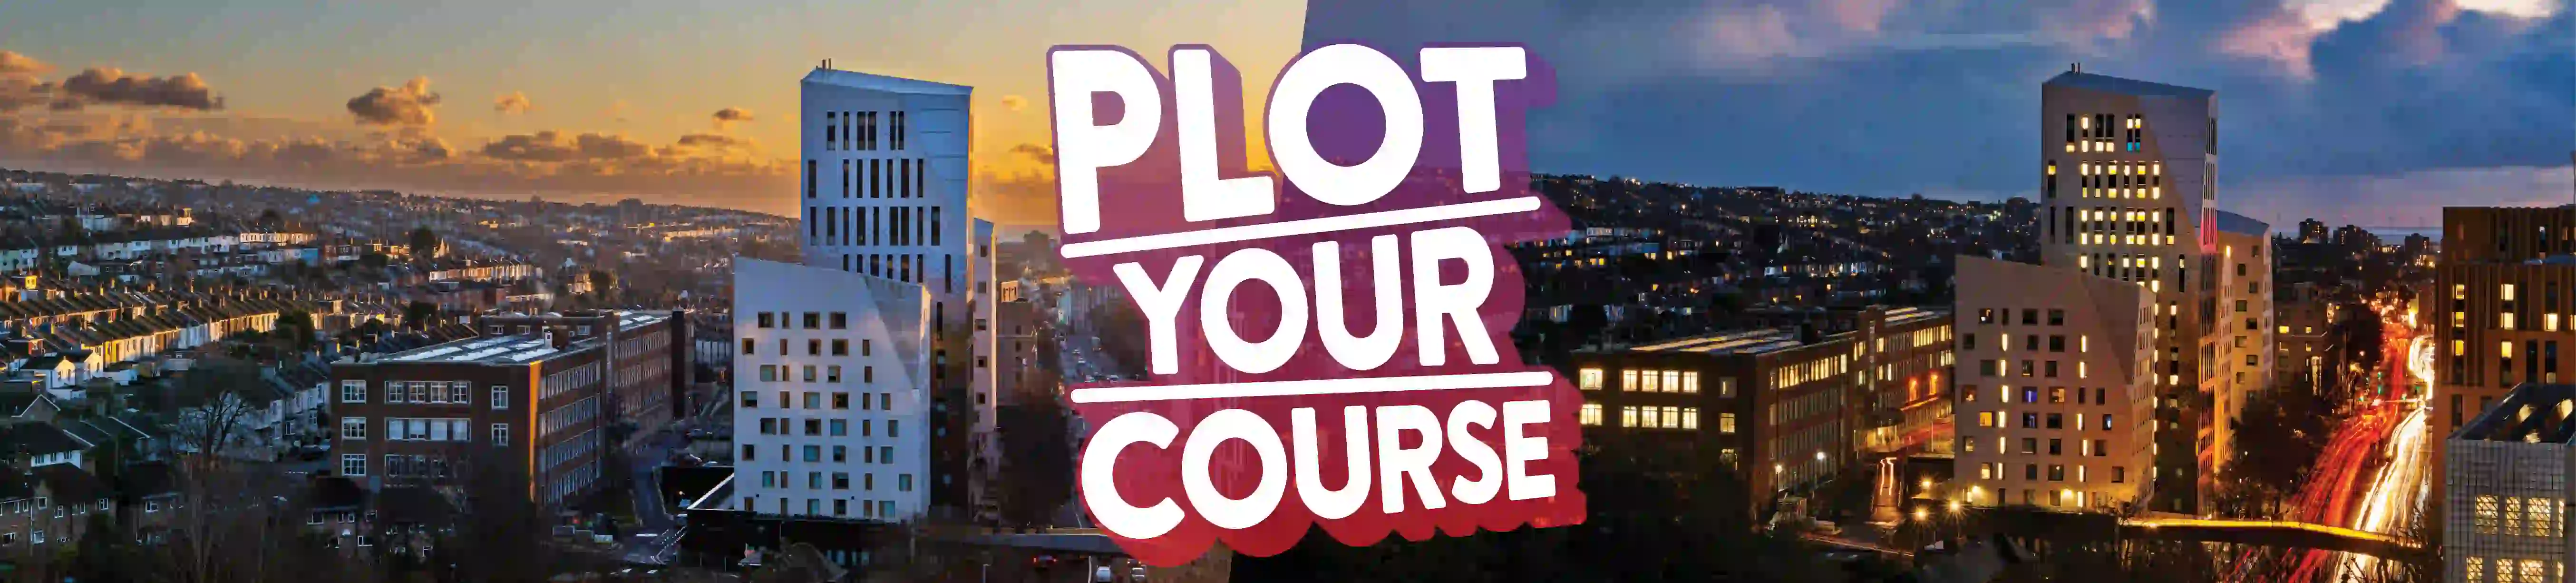 Graphic banner showing Moulsecoomb halls of residence in the day and at night with the text 'Plot your course'